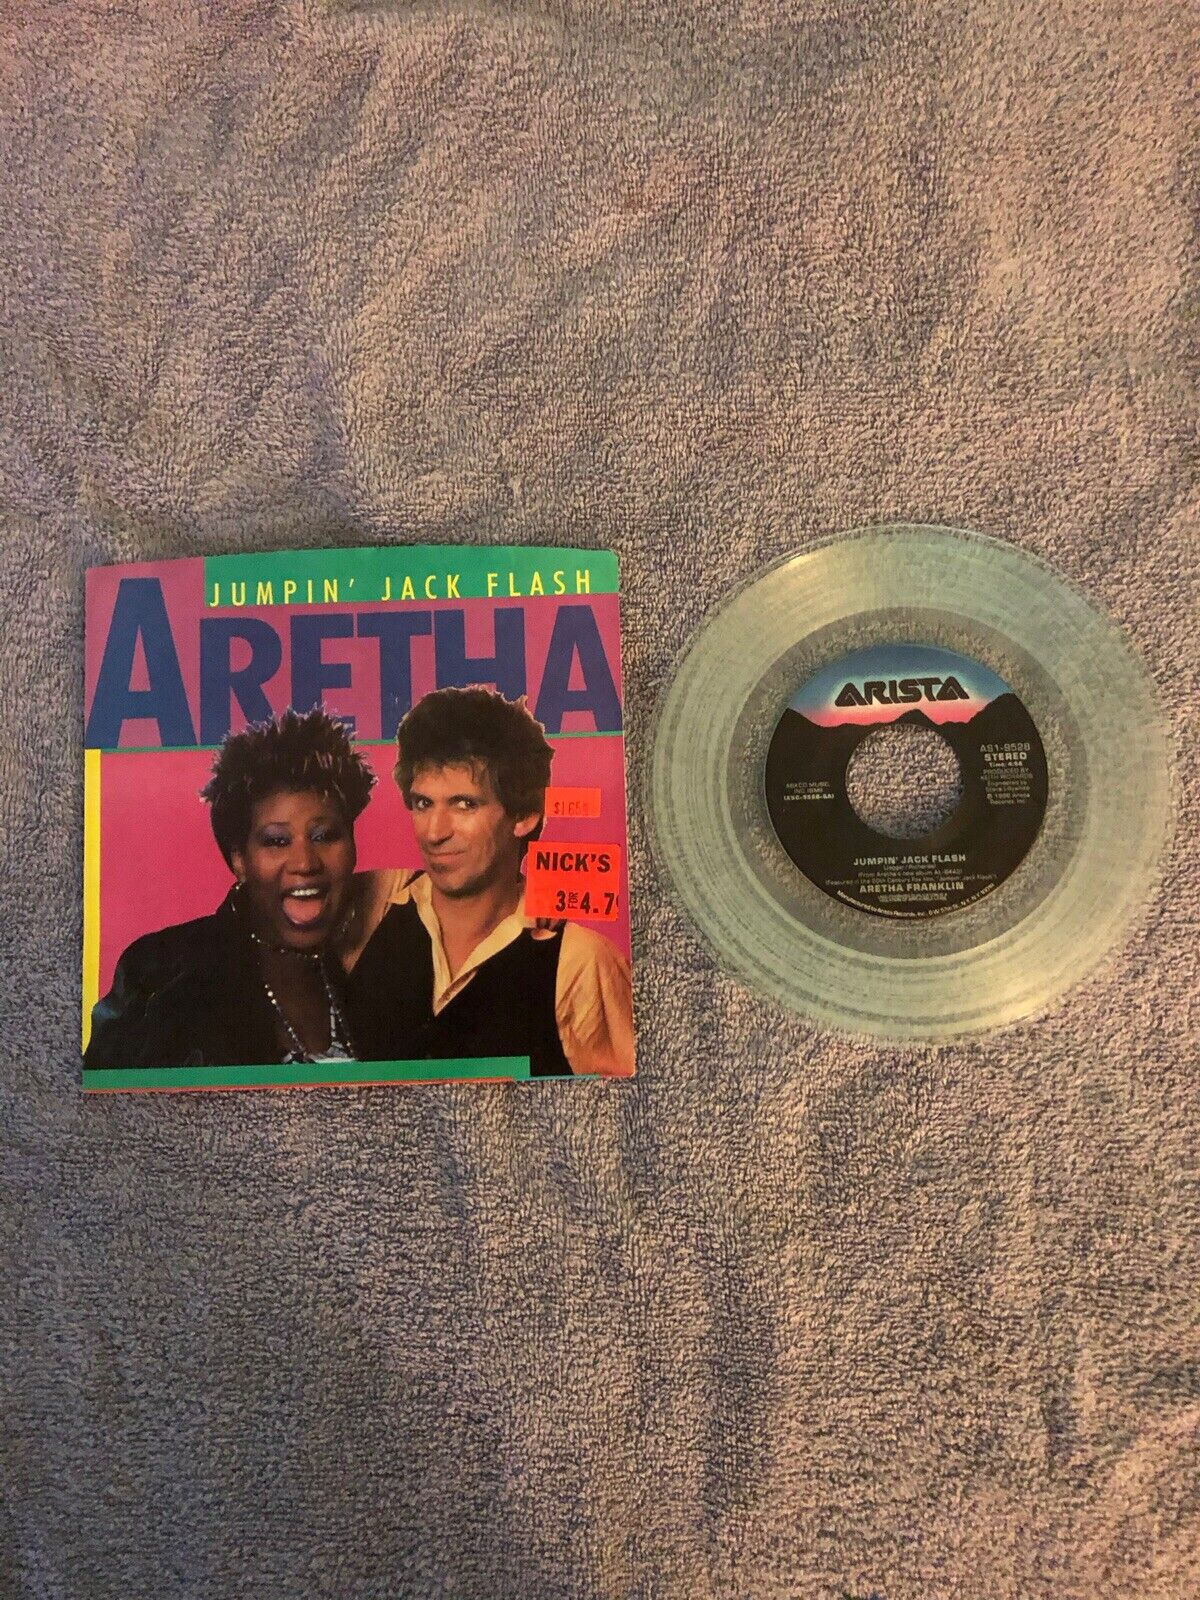 ARETHA FRANKLIN Jumpin' Jack Flash / Integrity CLEAR VINYL 7” Never played